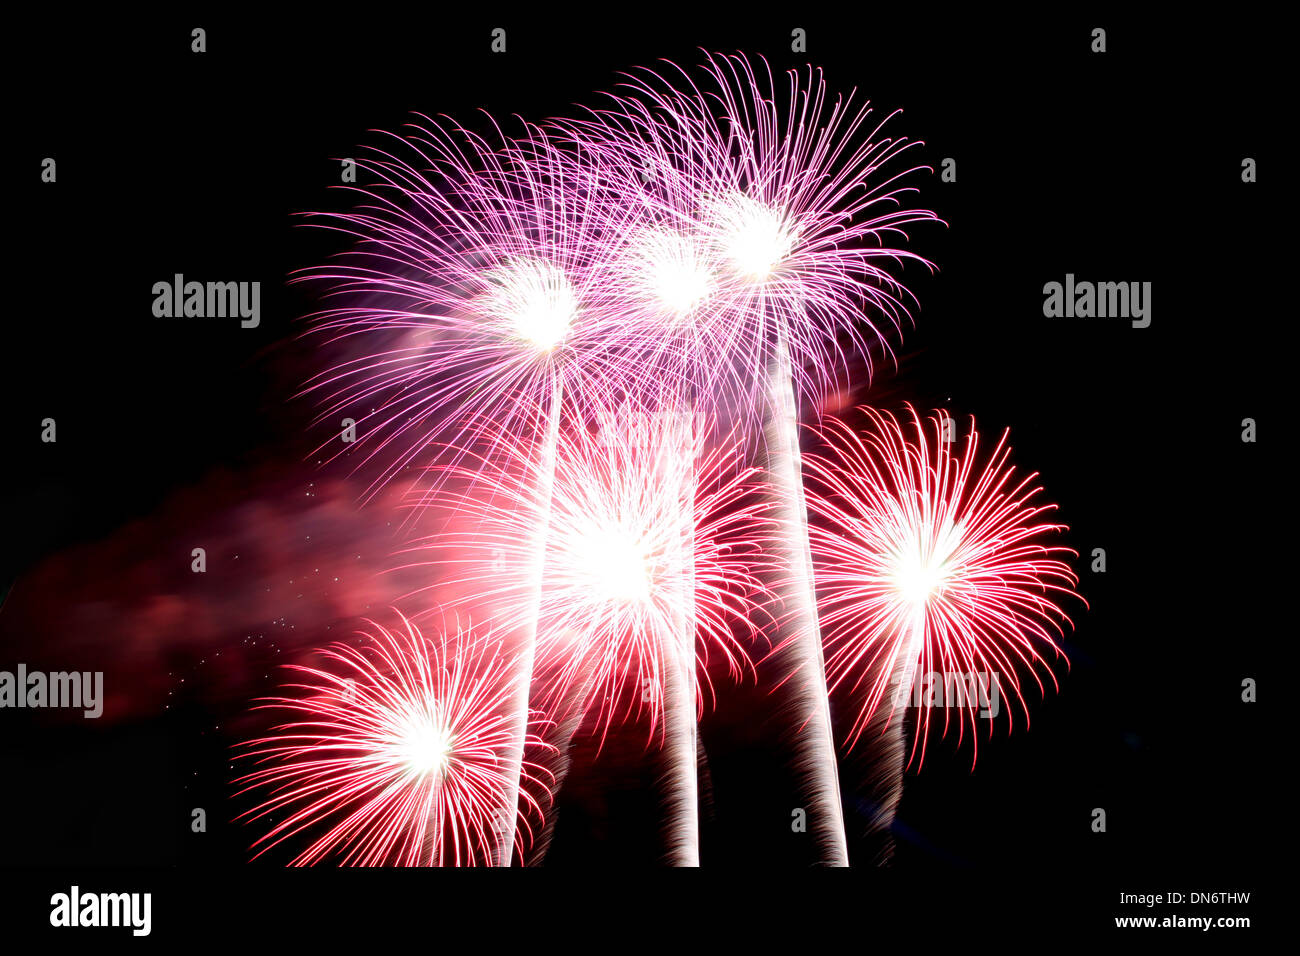 Purple and Red Fireworks Variety of Colorful in the darkness. Stock Photo